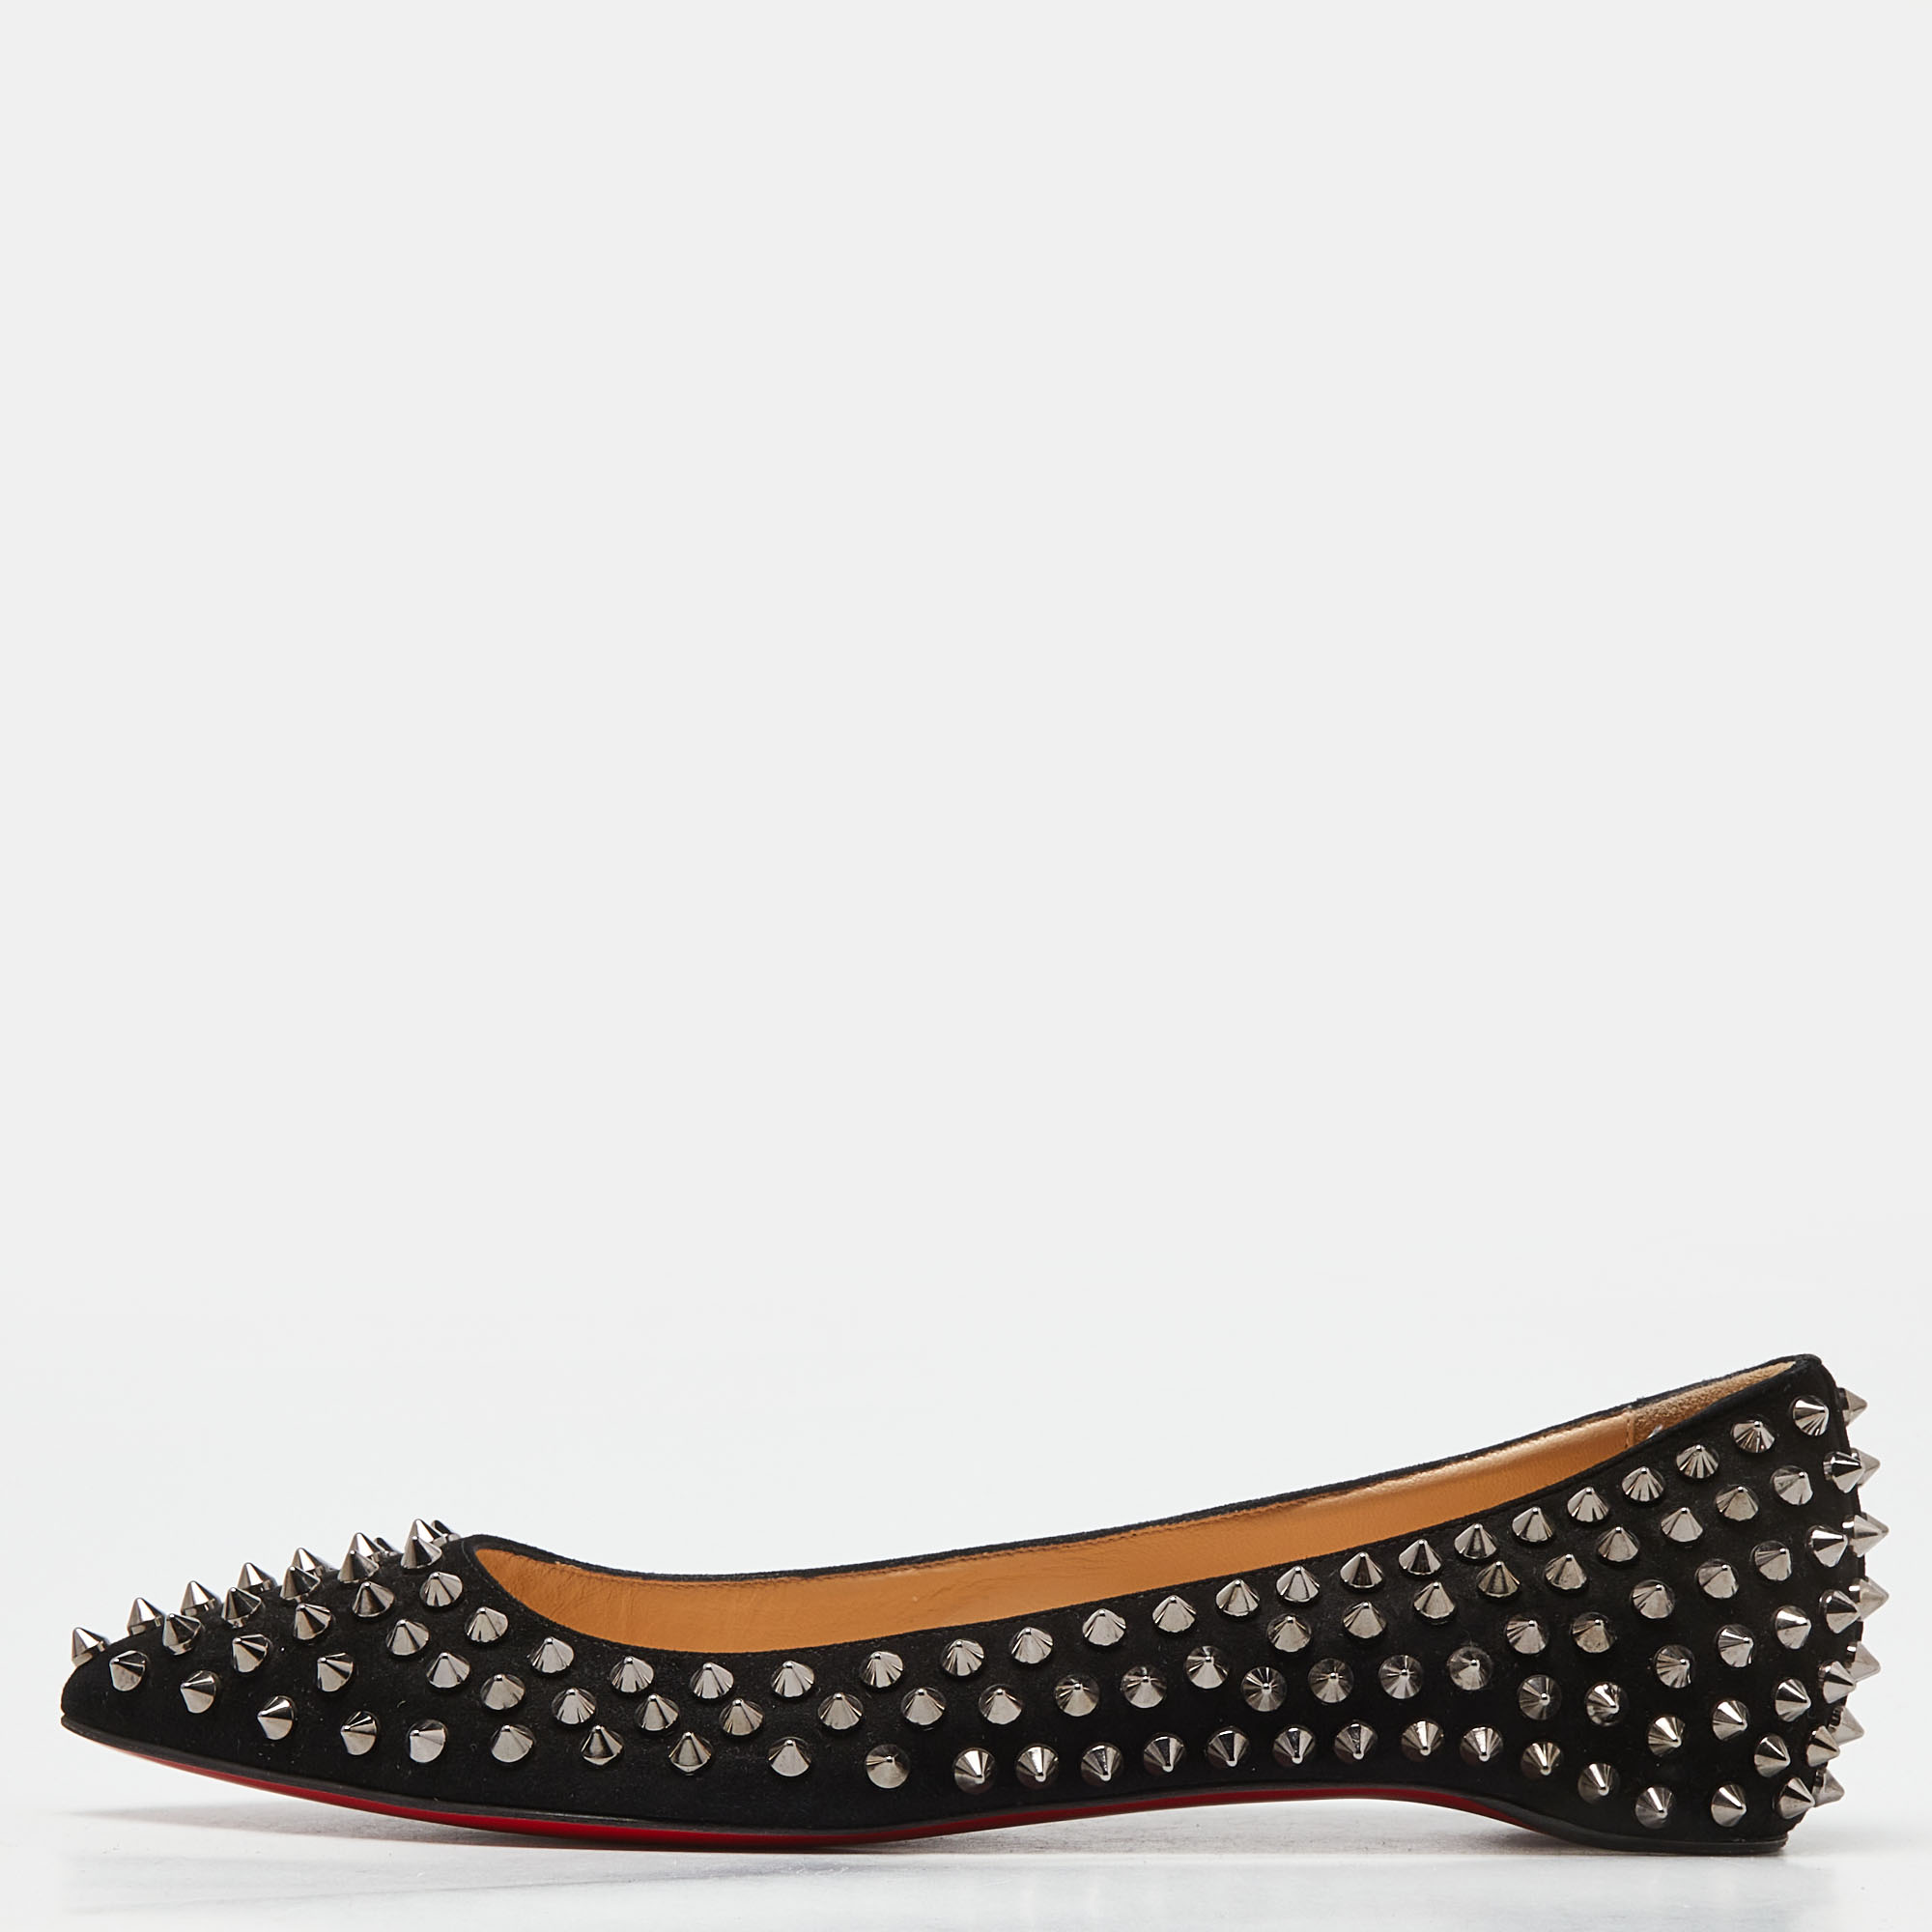 Christian louboutin black suede pigalle spikes ballet flats size 38